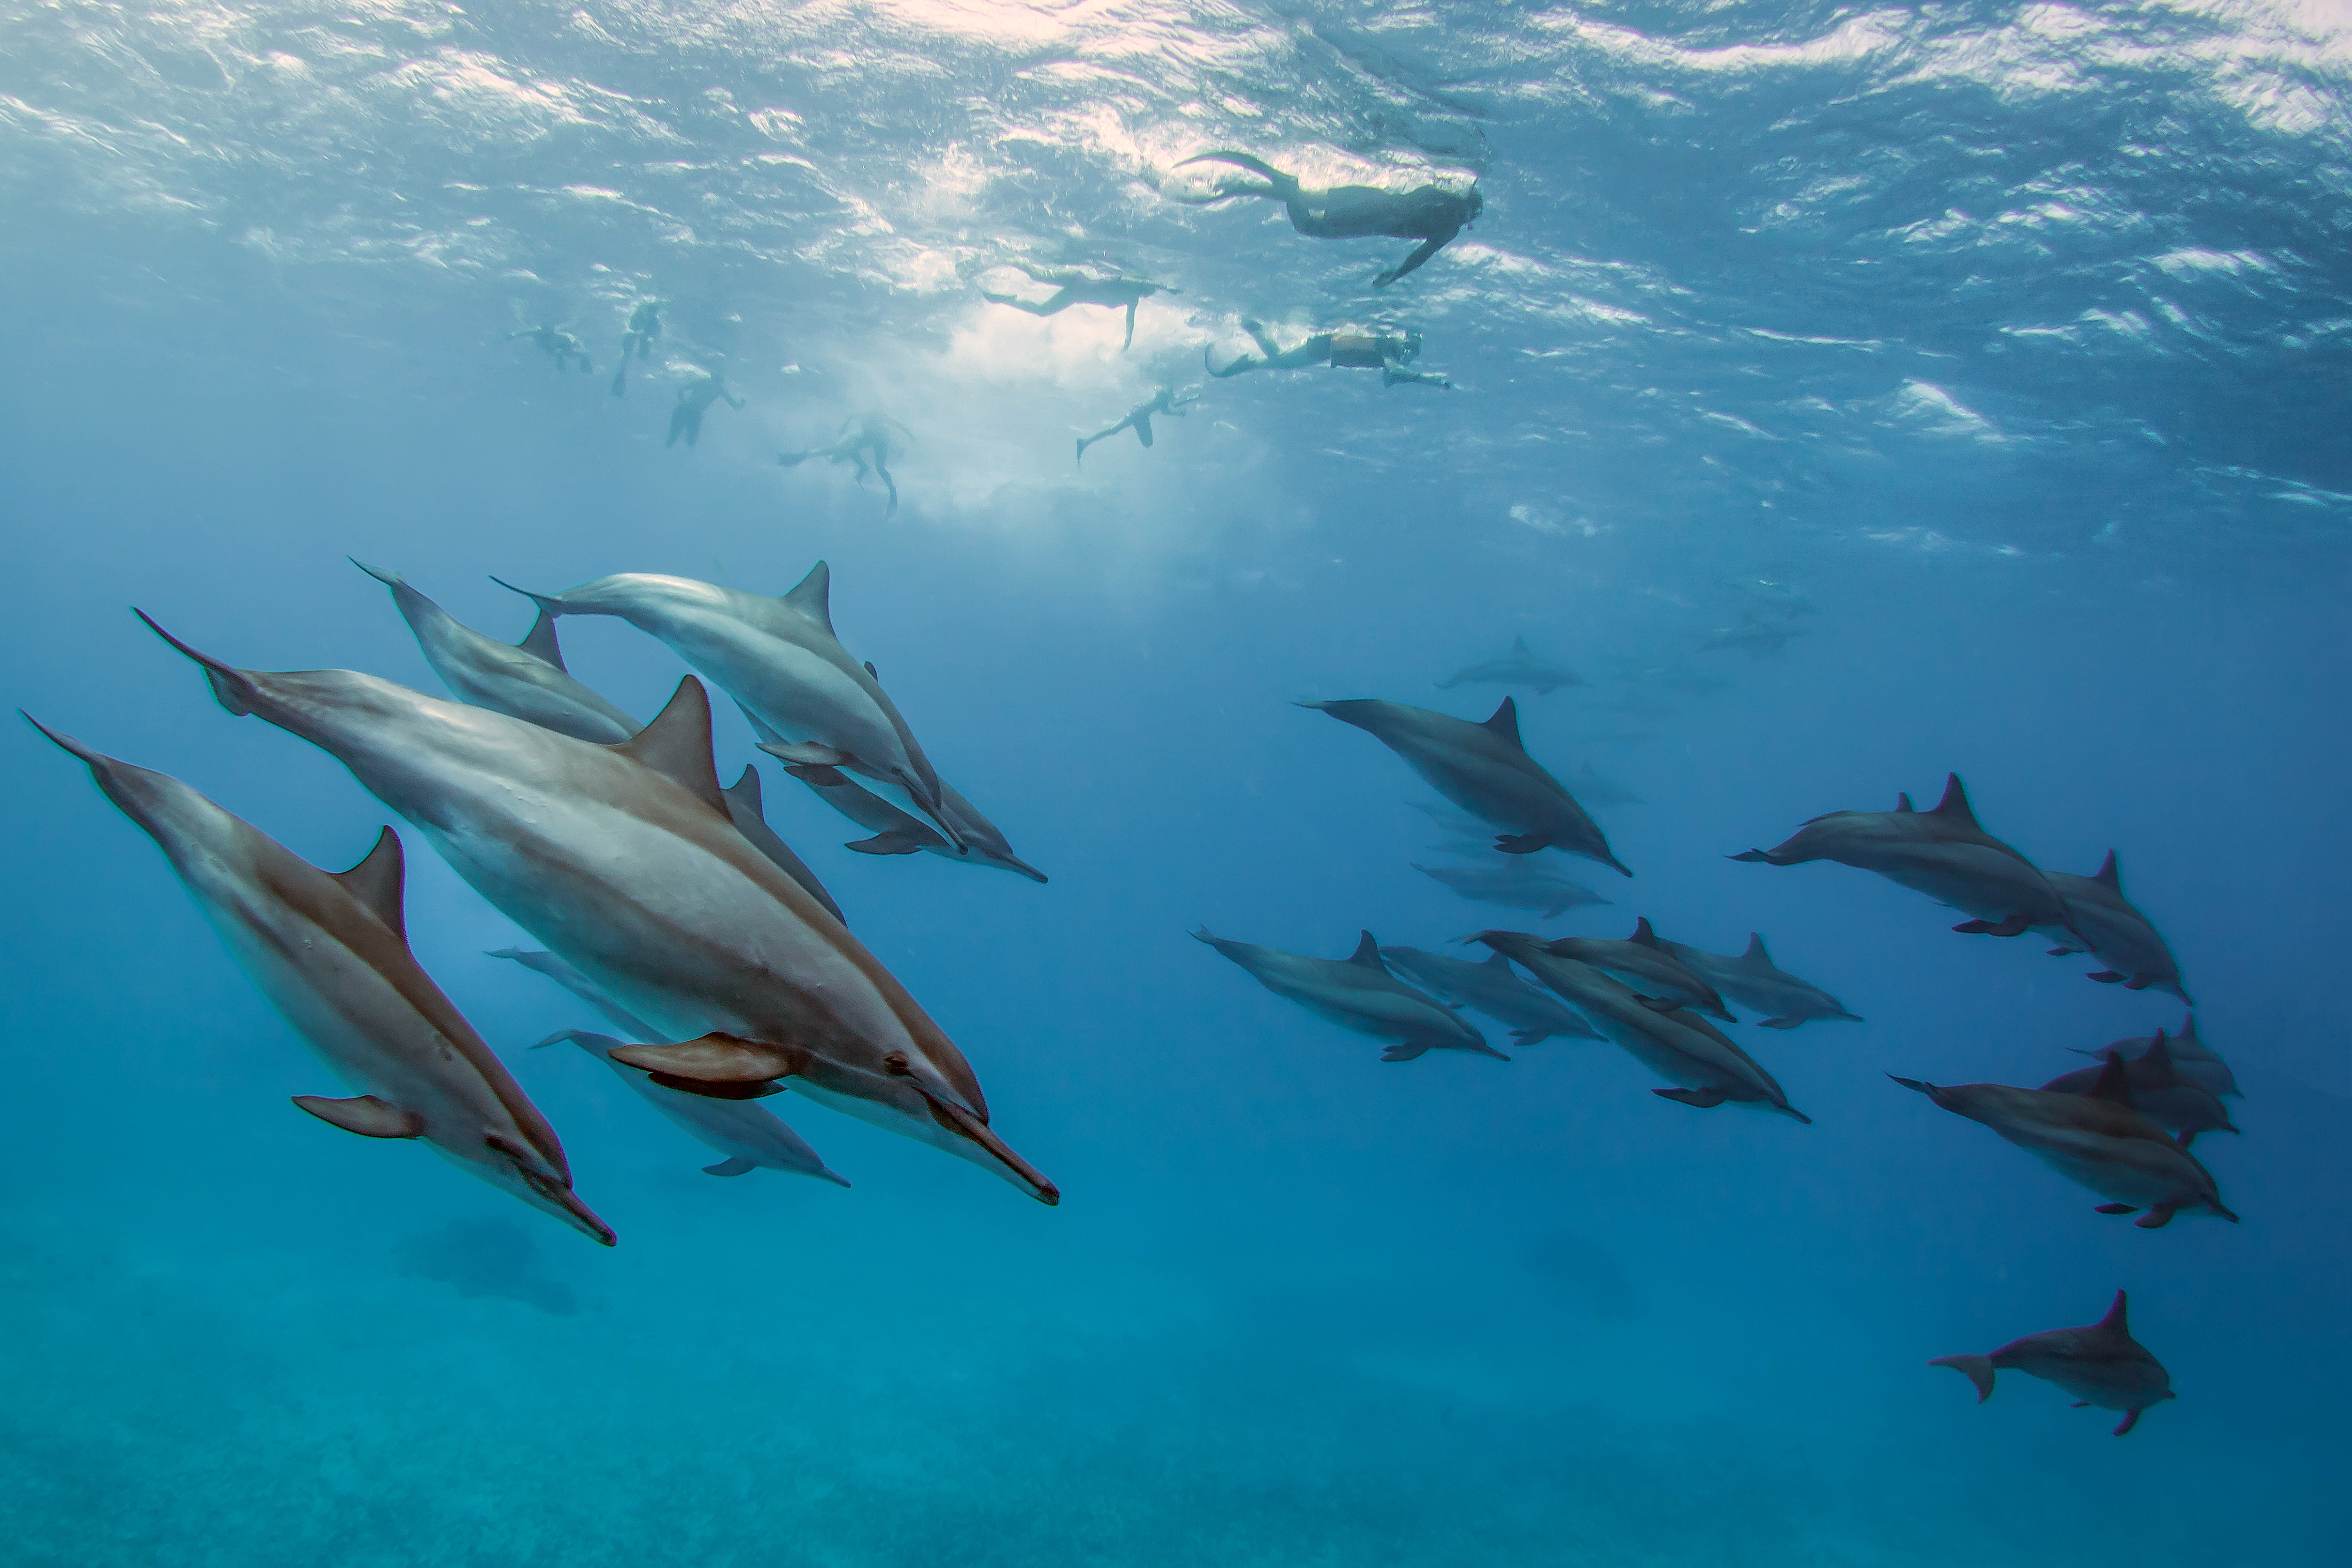 An unforgettable encounter with the dolphins.